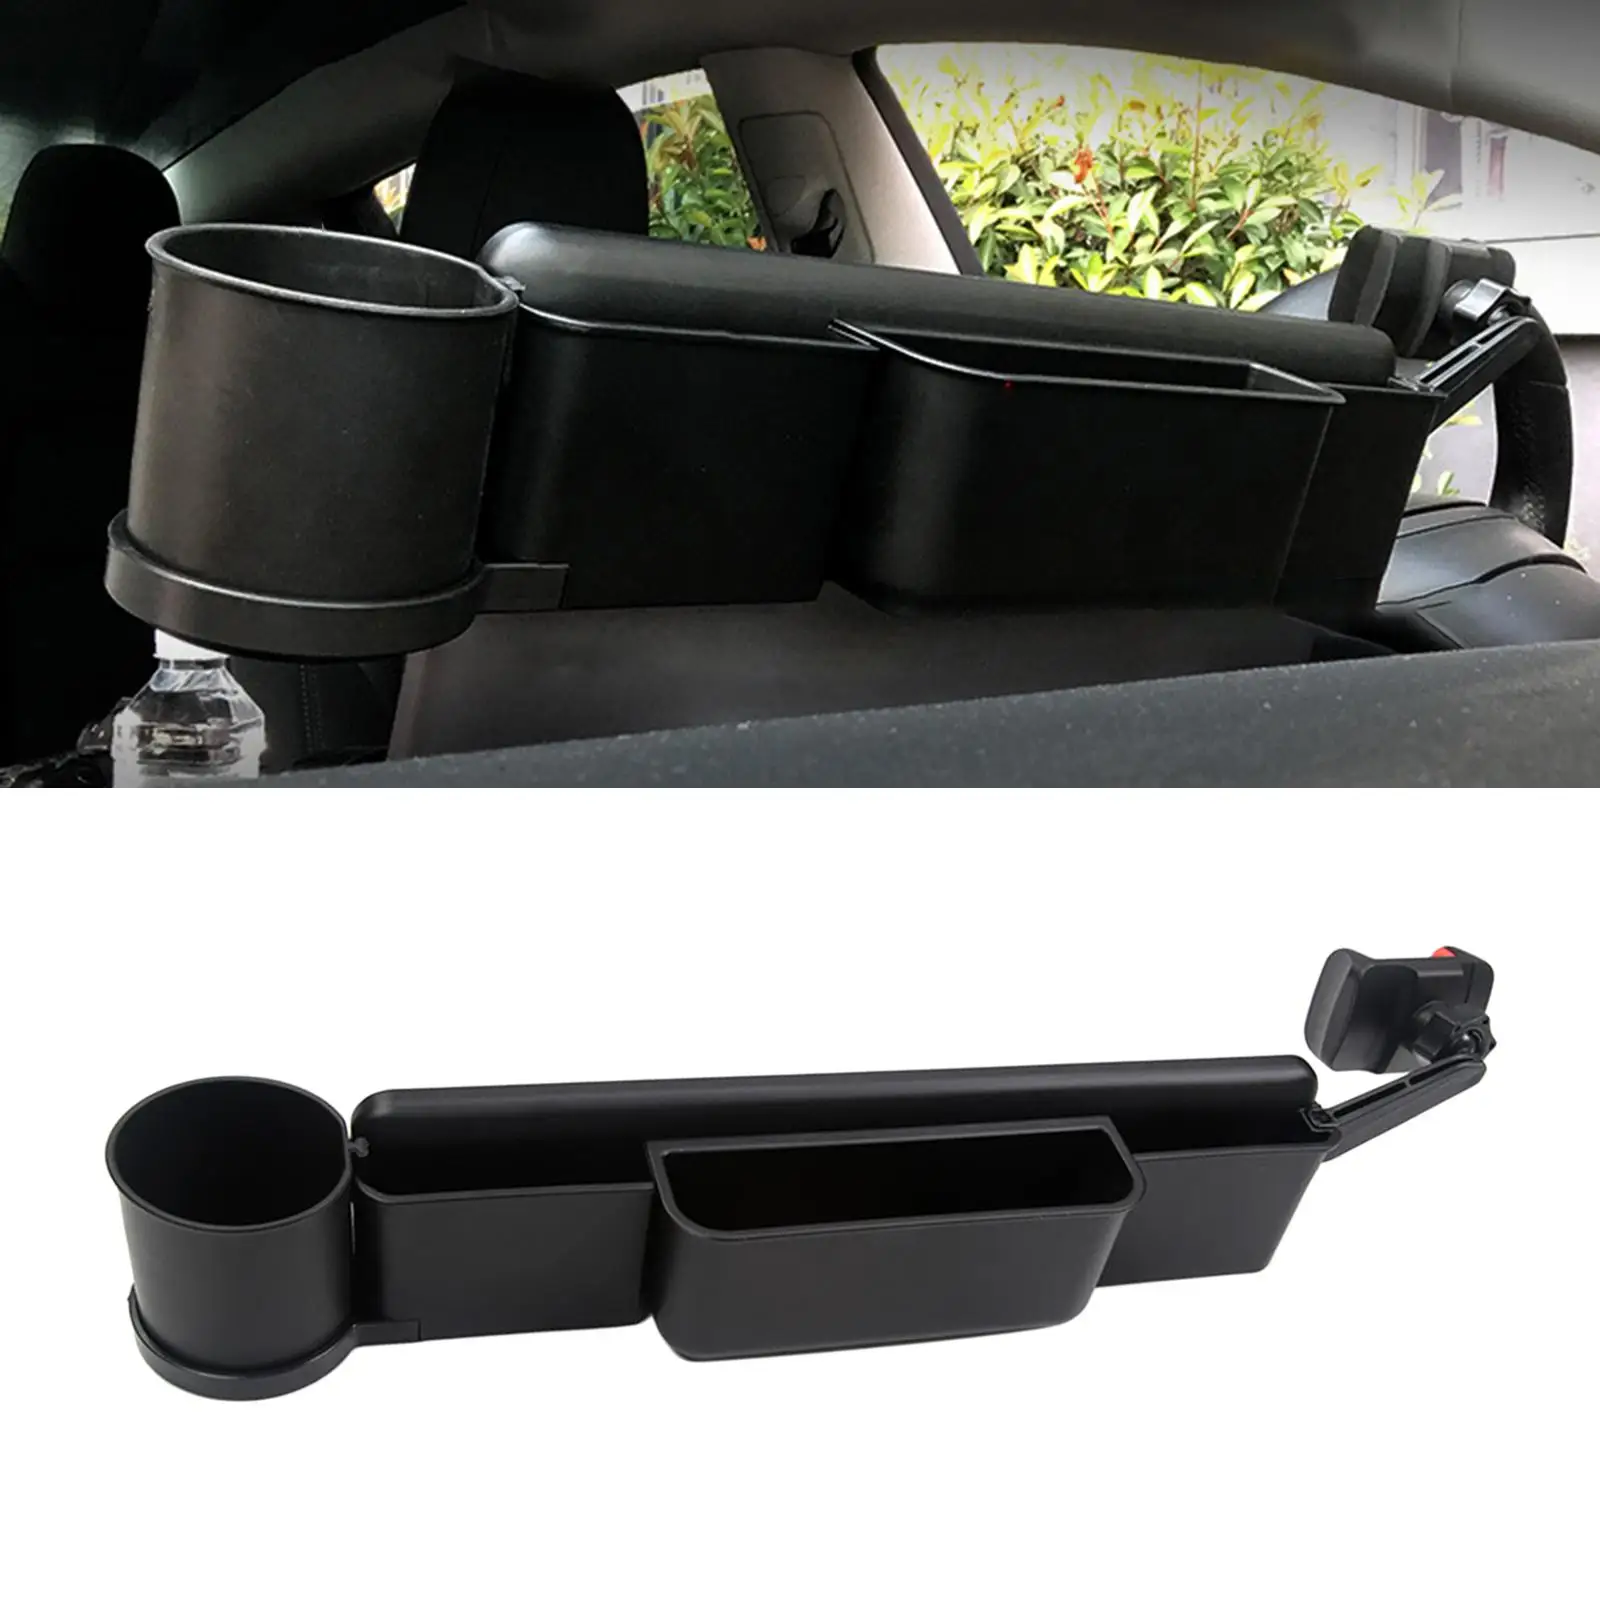 Car Phone Mount Stand Multifunction Drinks Holder Fits for/Y